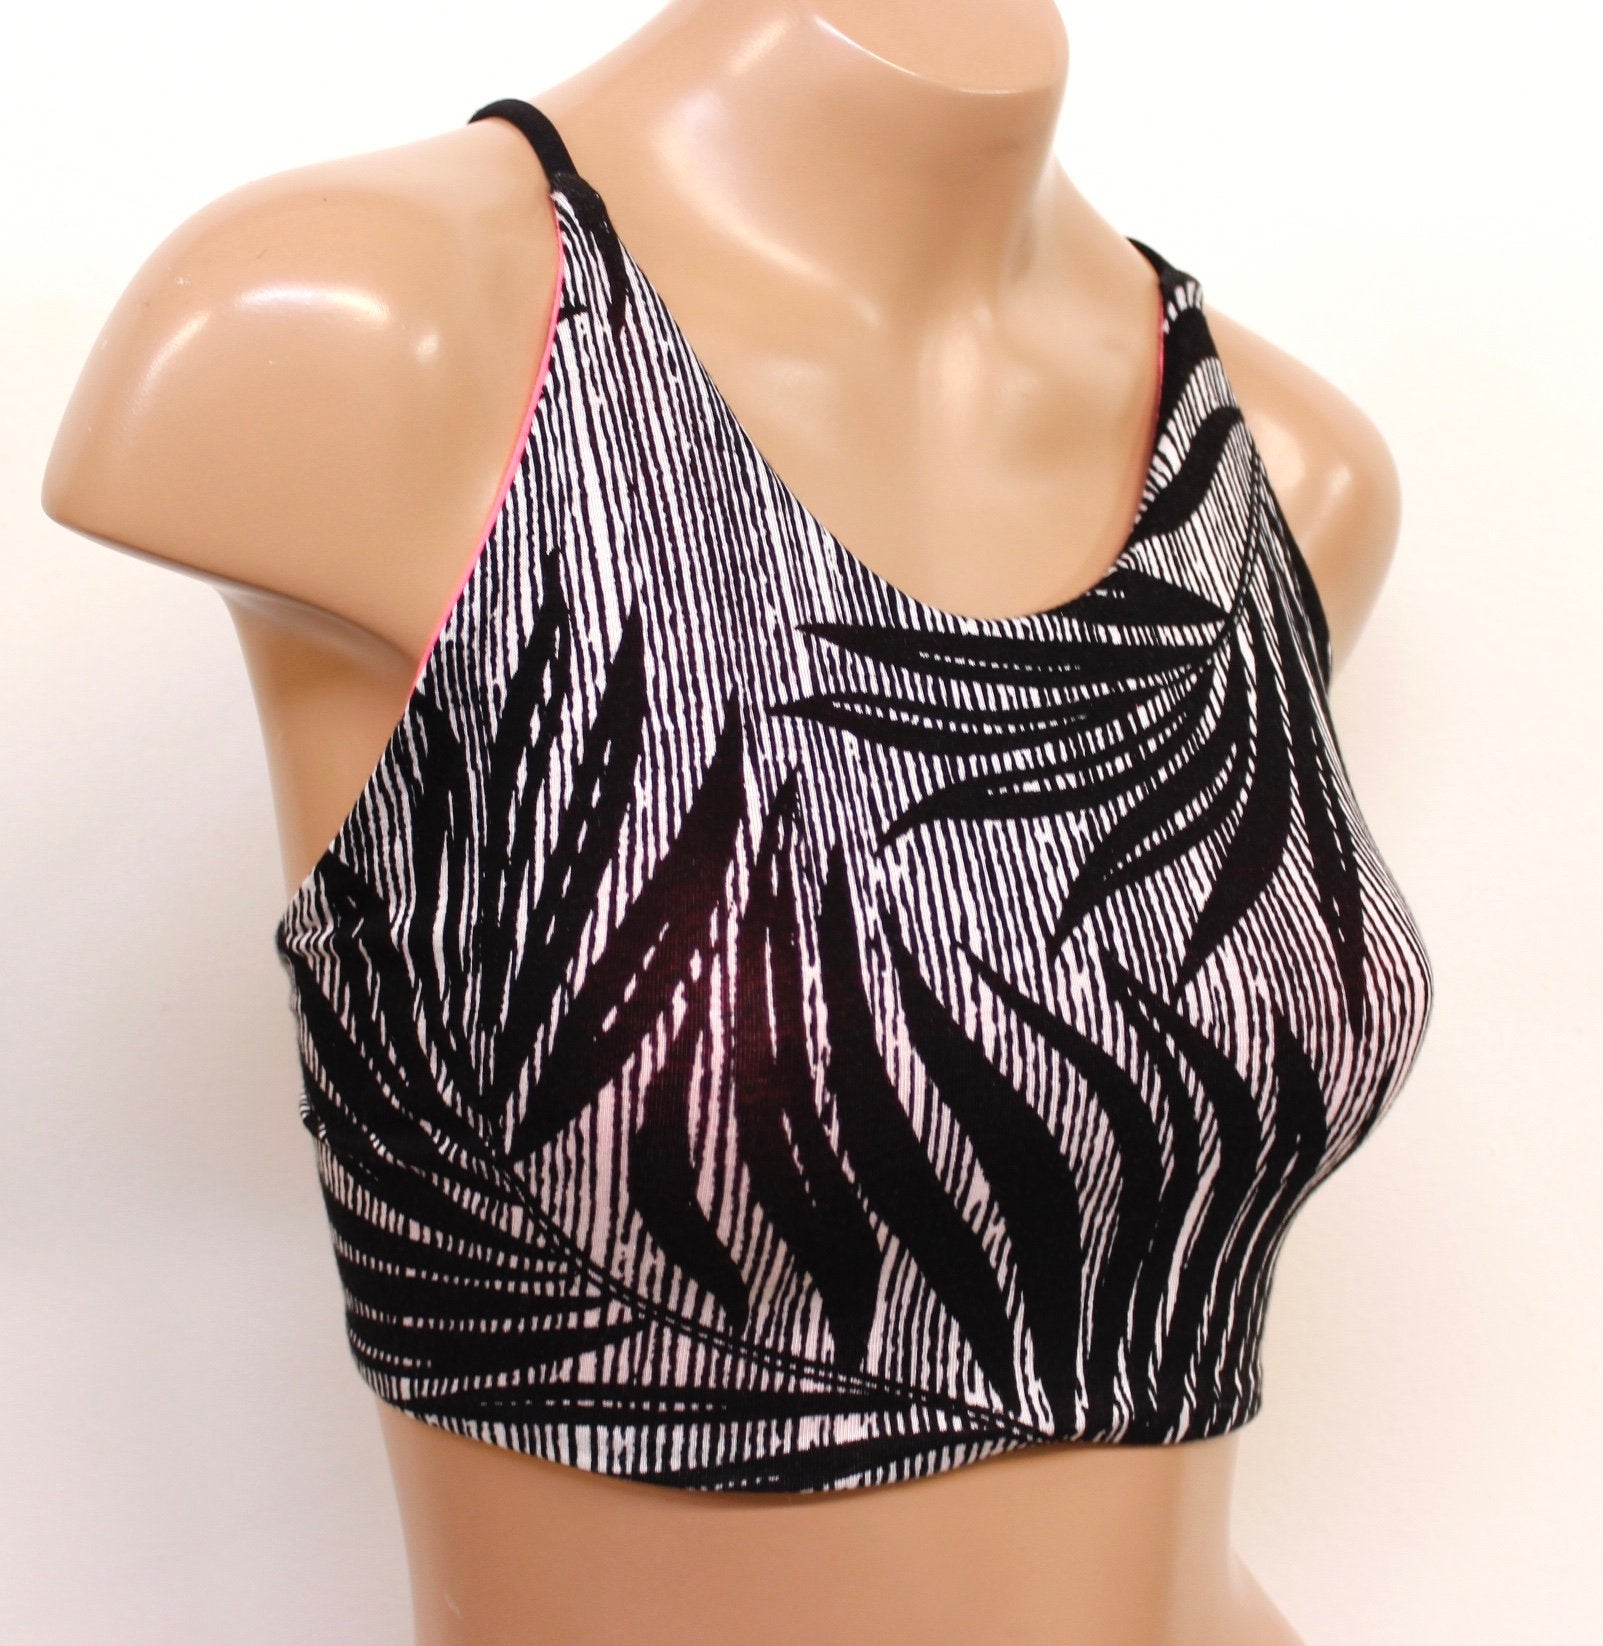 Ready to Ship! Muheeka Black and White Reversible PALM LEAF Print TOP, Crop Top, Open Back, Tank Top, Lace-Up, Stripes, Neon Pink